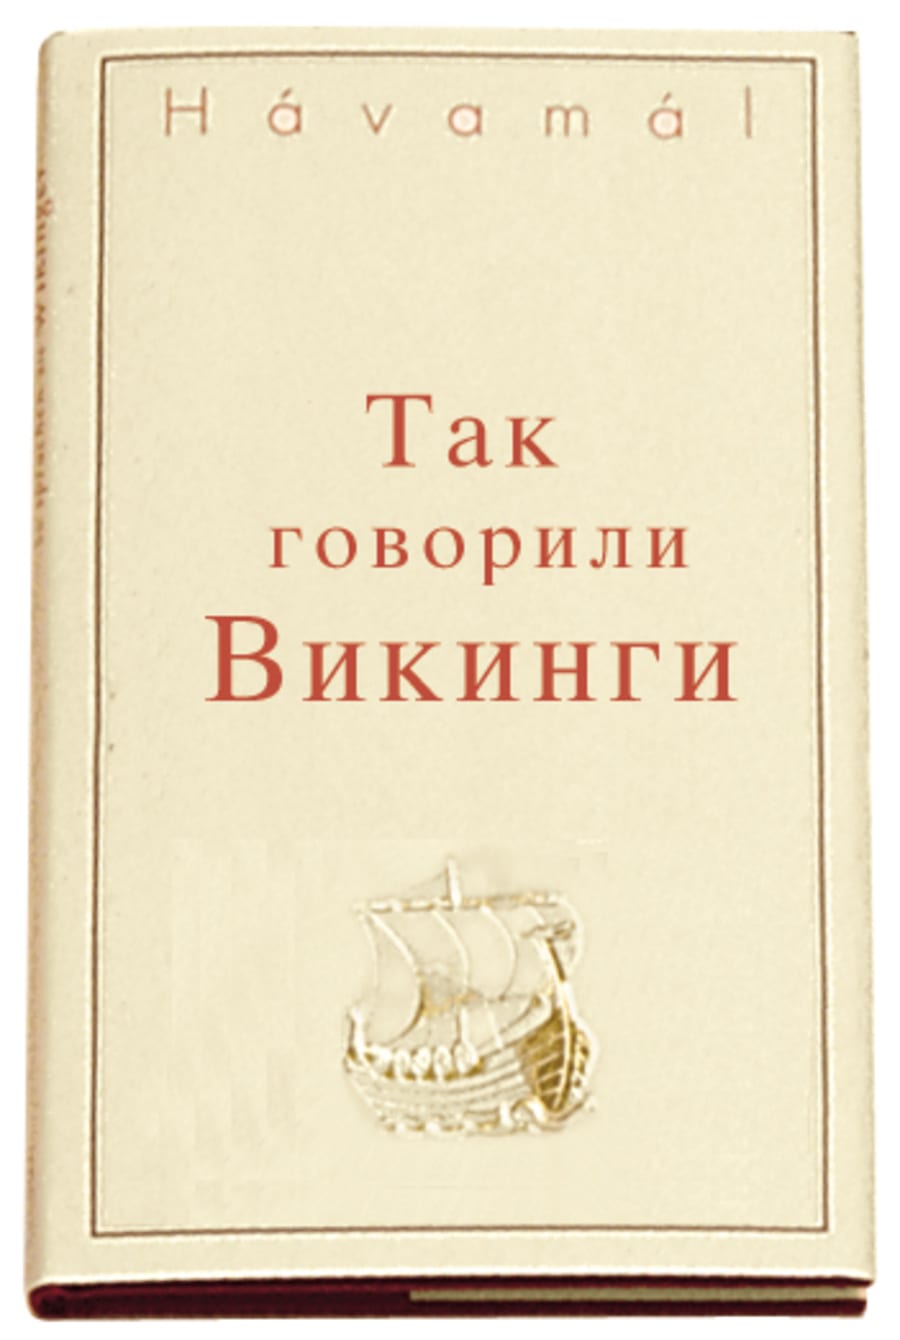 The Sayings of the Vikings - Russian